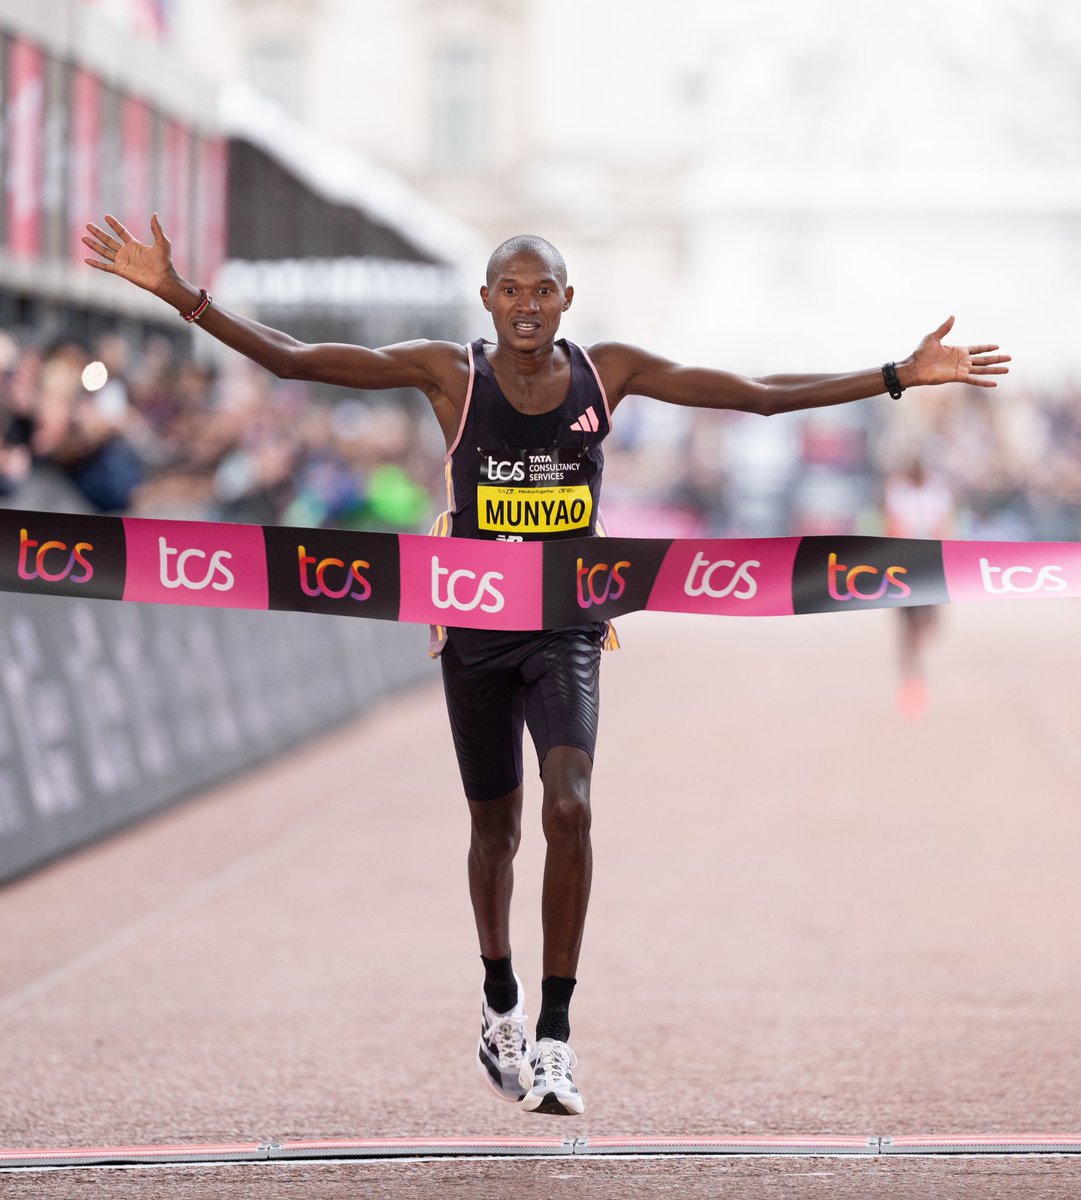 Hongera Alexander Mutiso for winning the men's #LondonMarathon in 2:04:01, your first win at World Marathon Majors. You seal double joy for Kenya 🇰🇪 in the streets of London after Peres Jepchirchir’s world record triumph in the women’s race. #londonmarathon2024